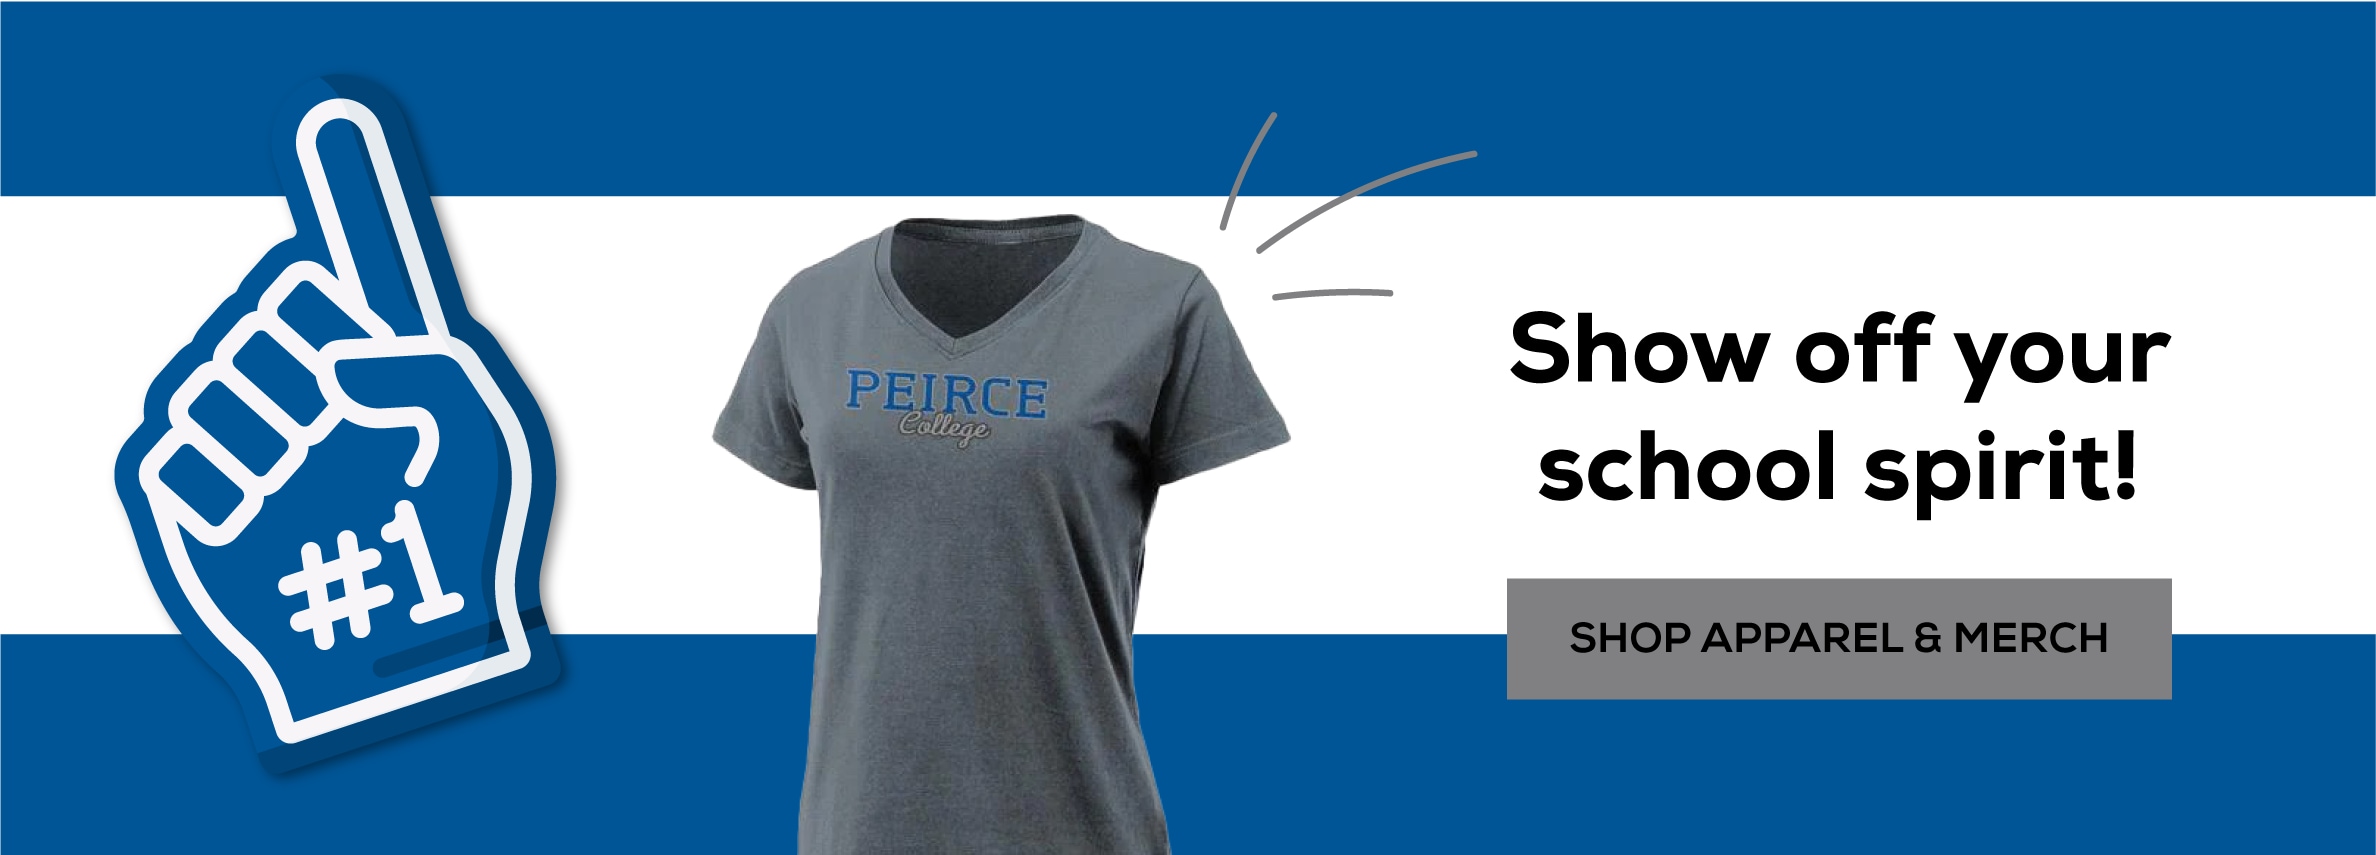 Show off your school spirit! Shop apparel and merch.